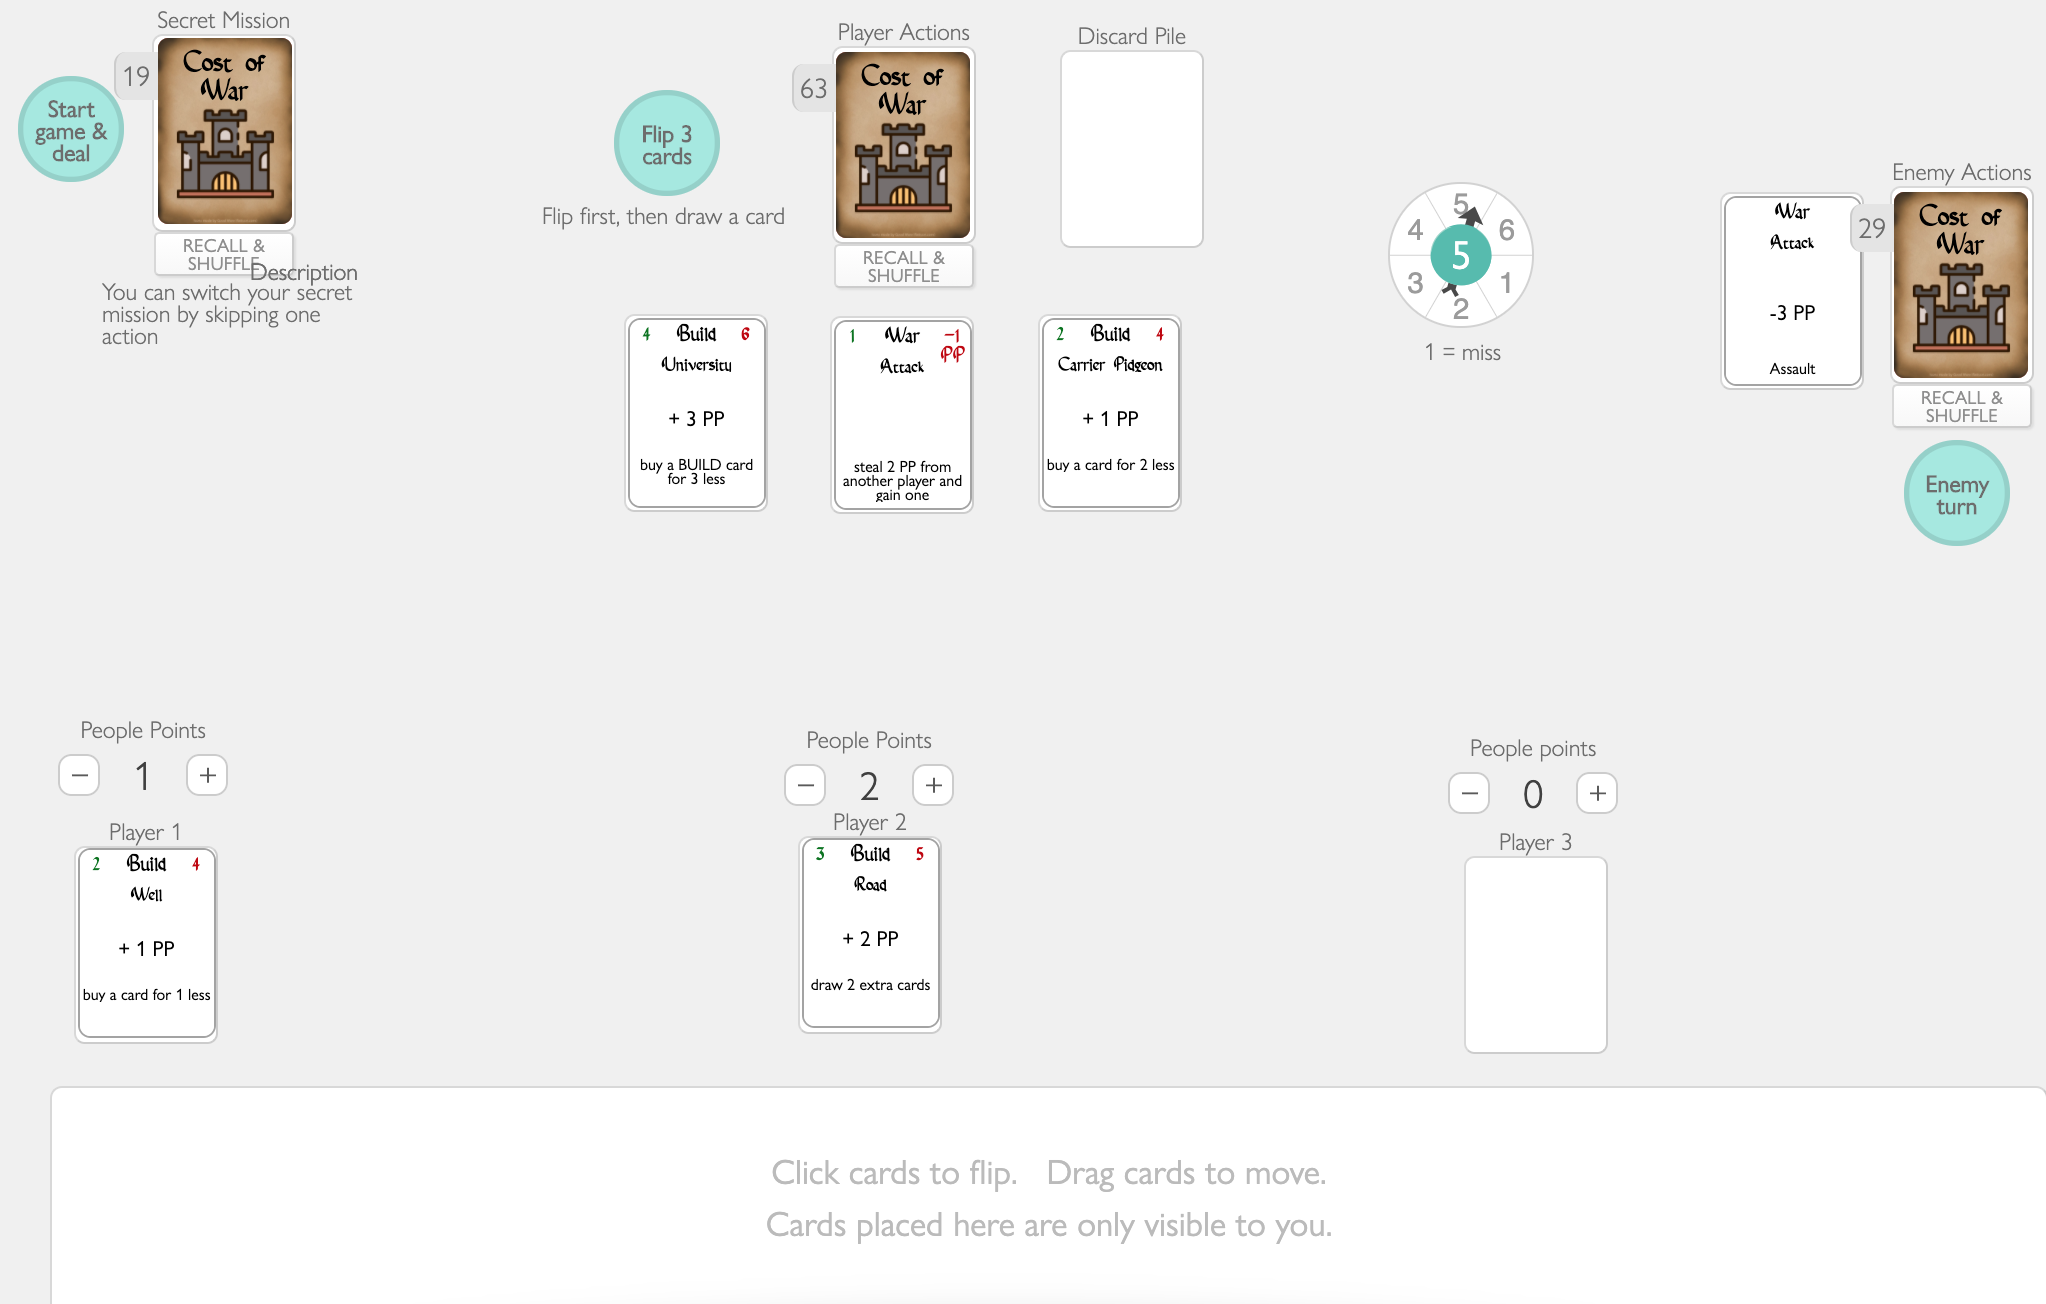 First prototype game in Playingcards.io